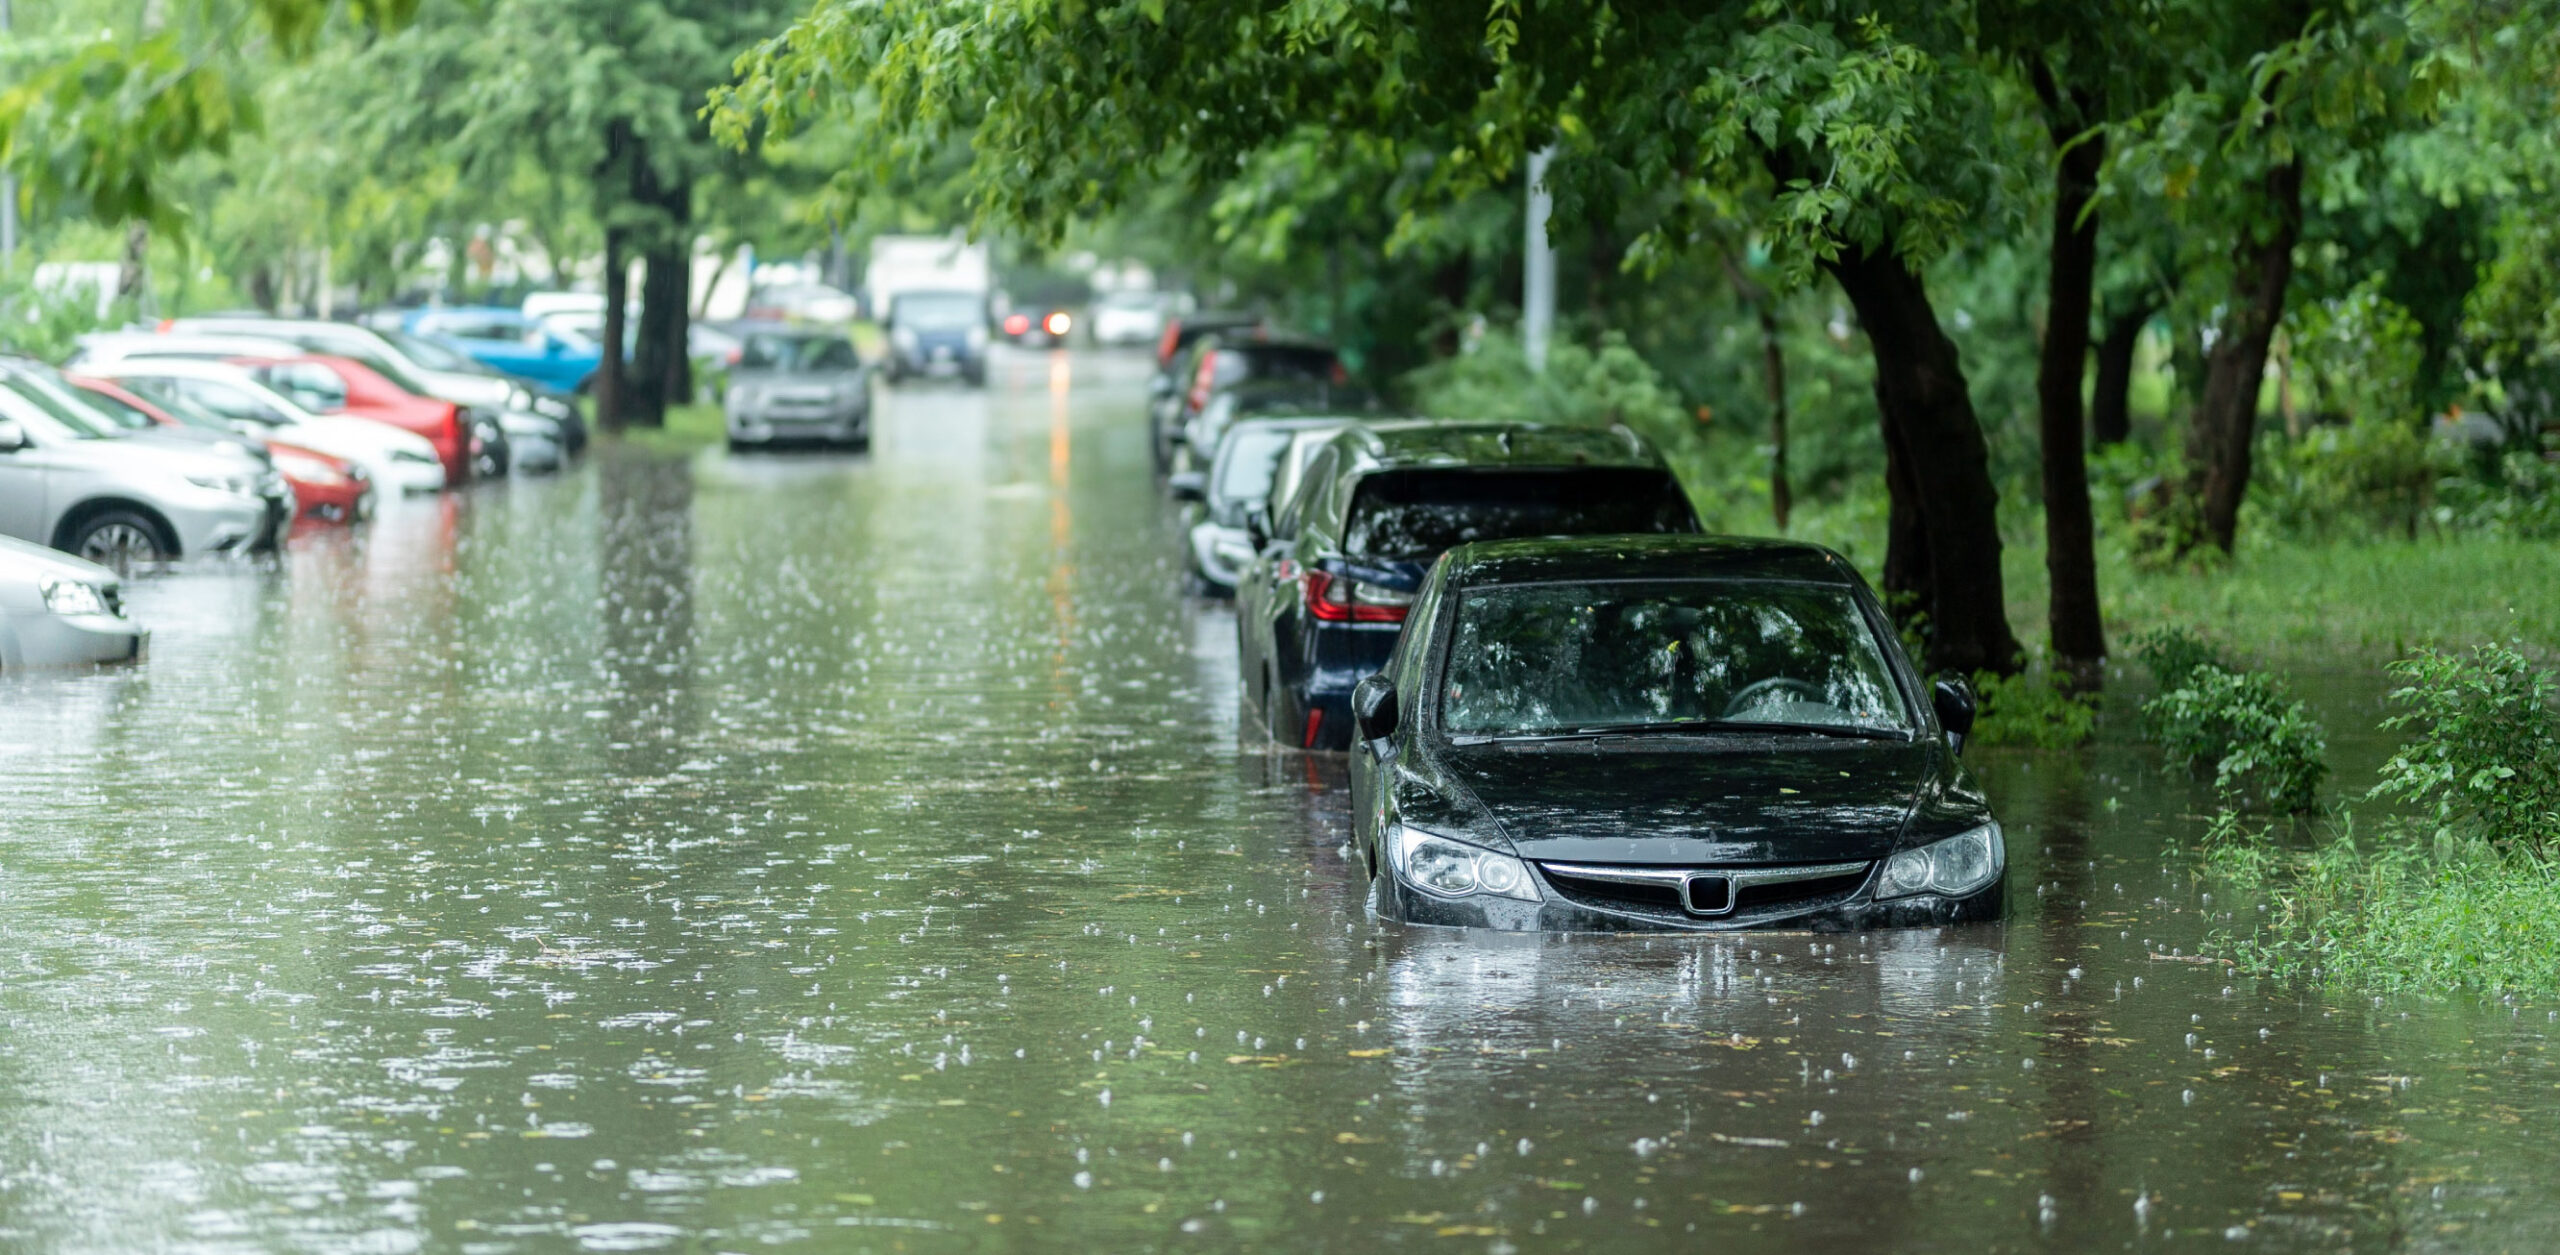 Flooded cars on the street of the city